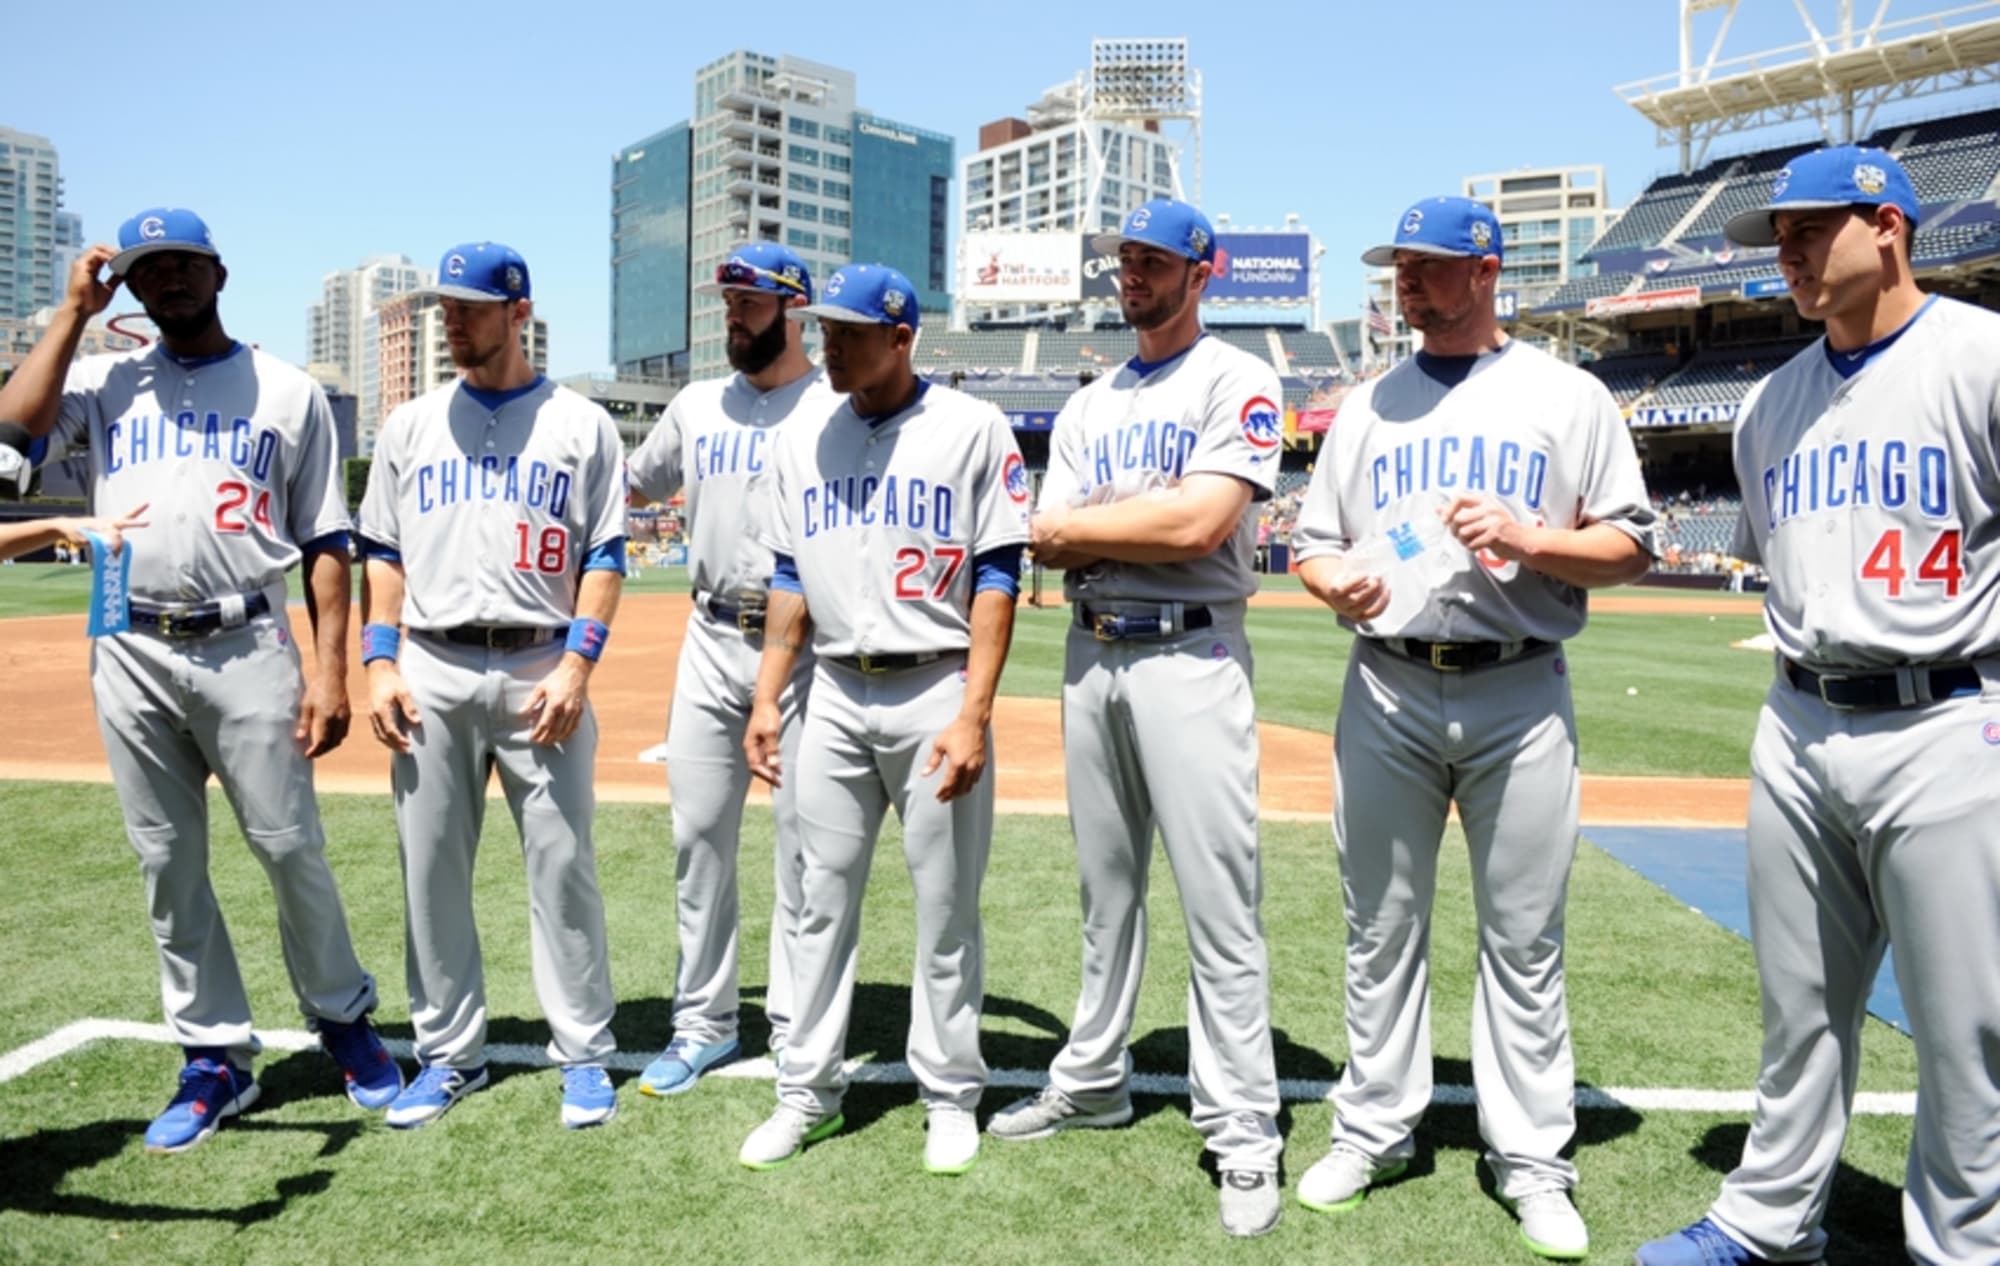 Chicago Cubs How did they fare in the AllStar Game?